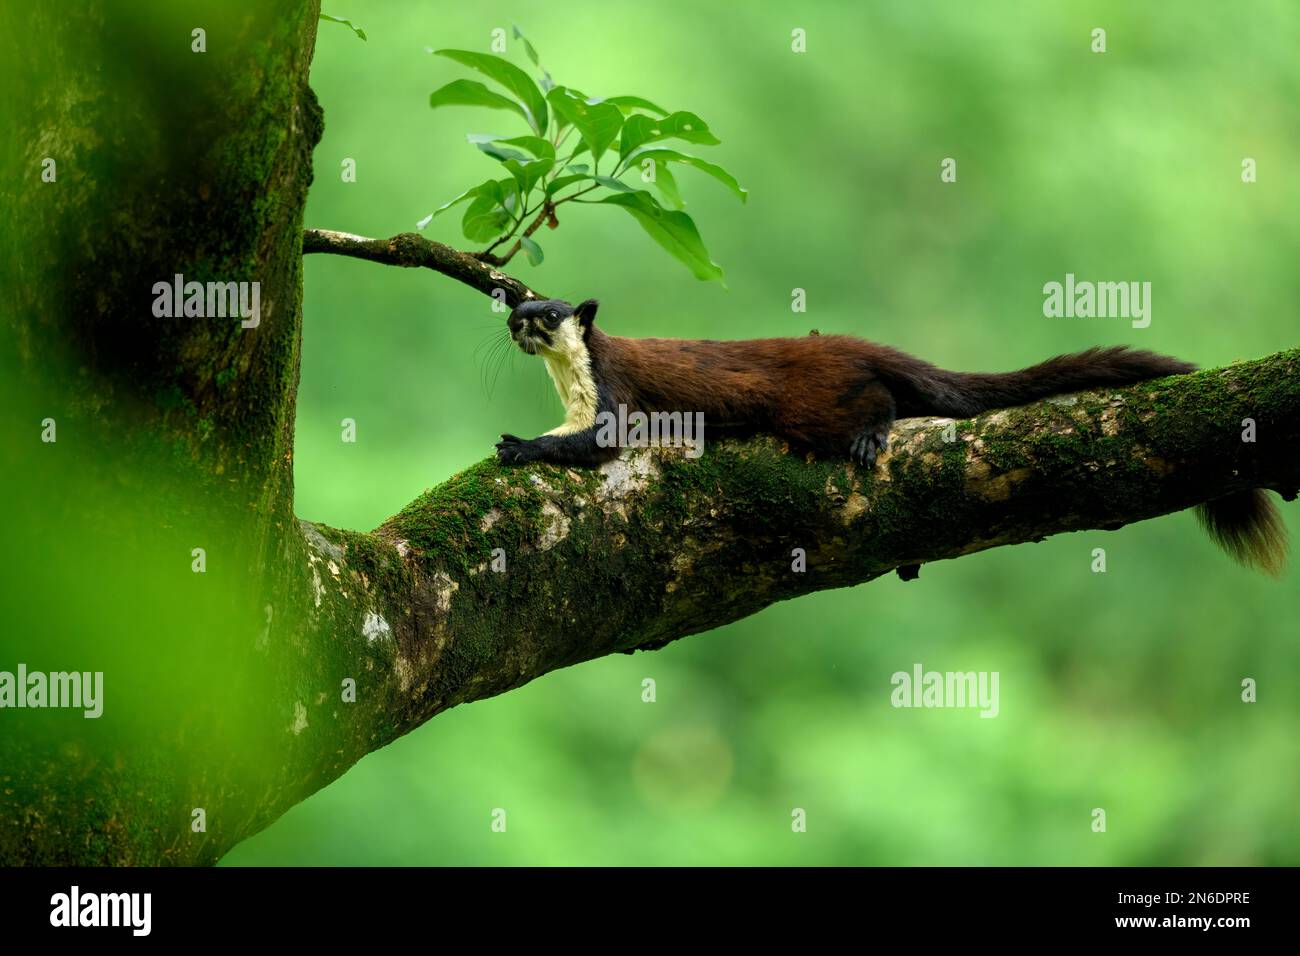 A black giant squirrel or Malayan giant squirrel (Ratufa bicolor) resting on a thick mossy branch of a silk cotton tree Stock Photo